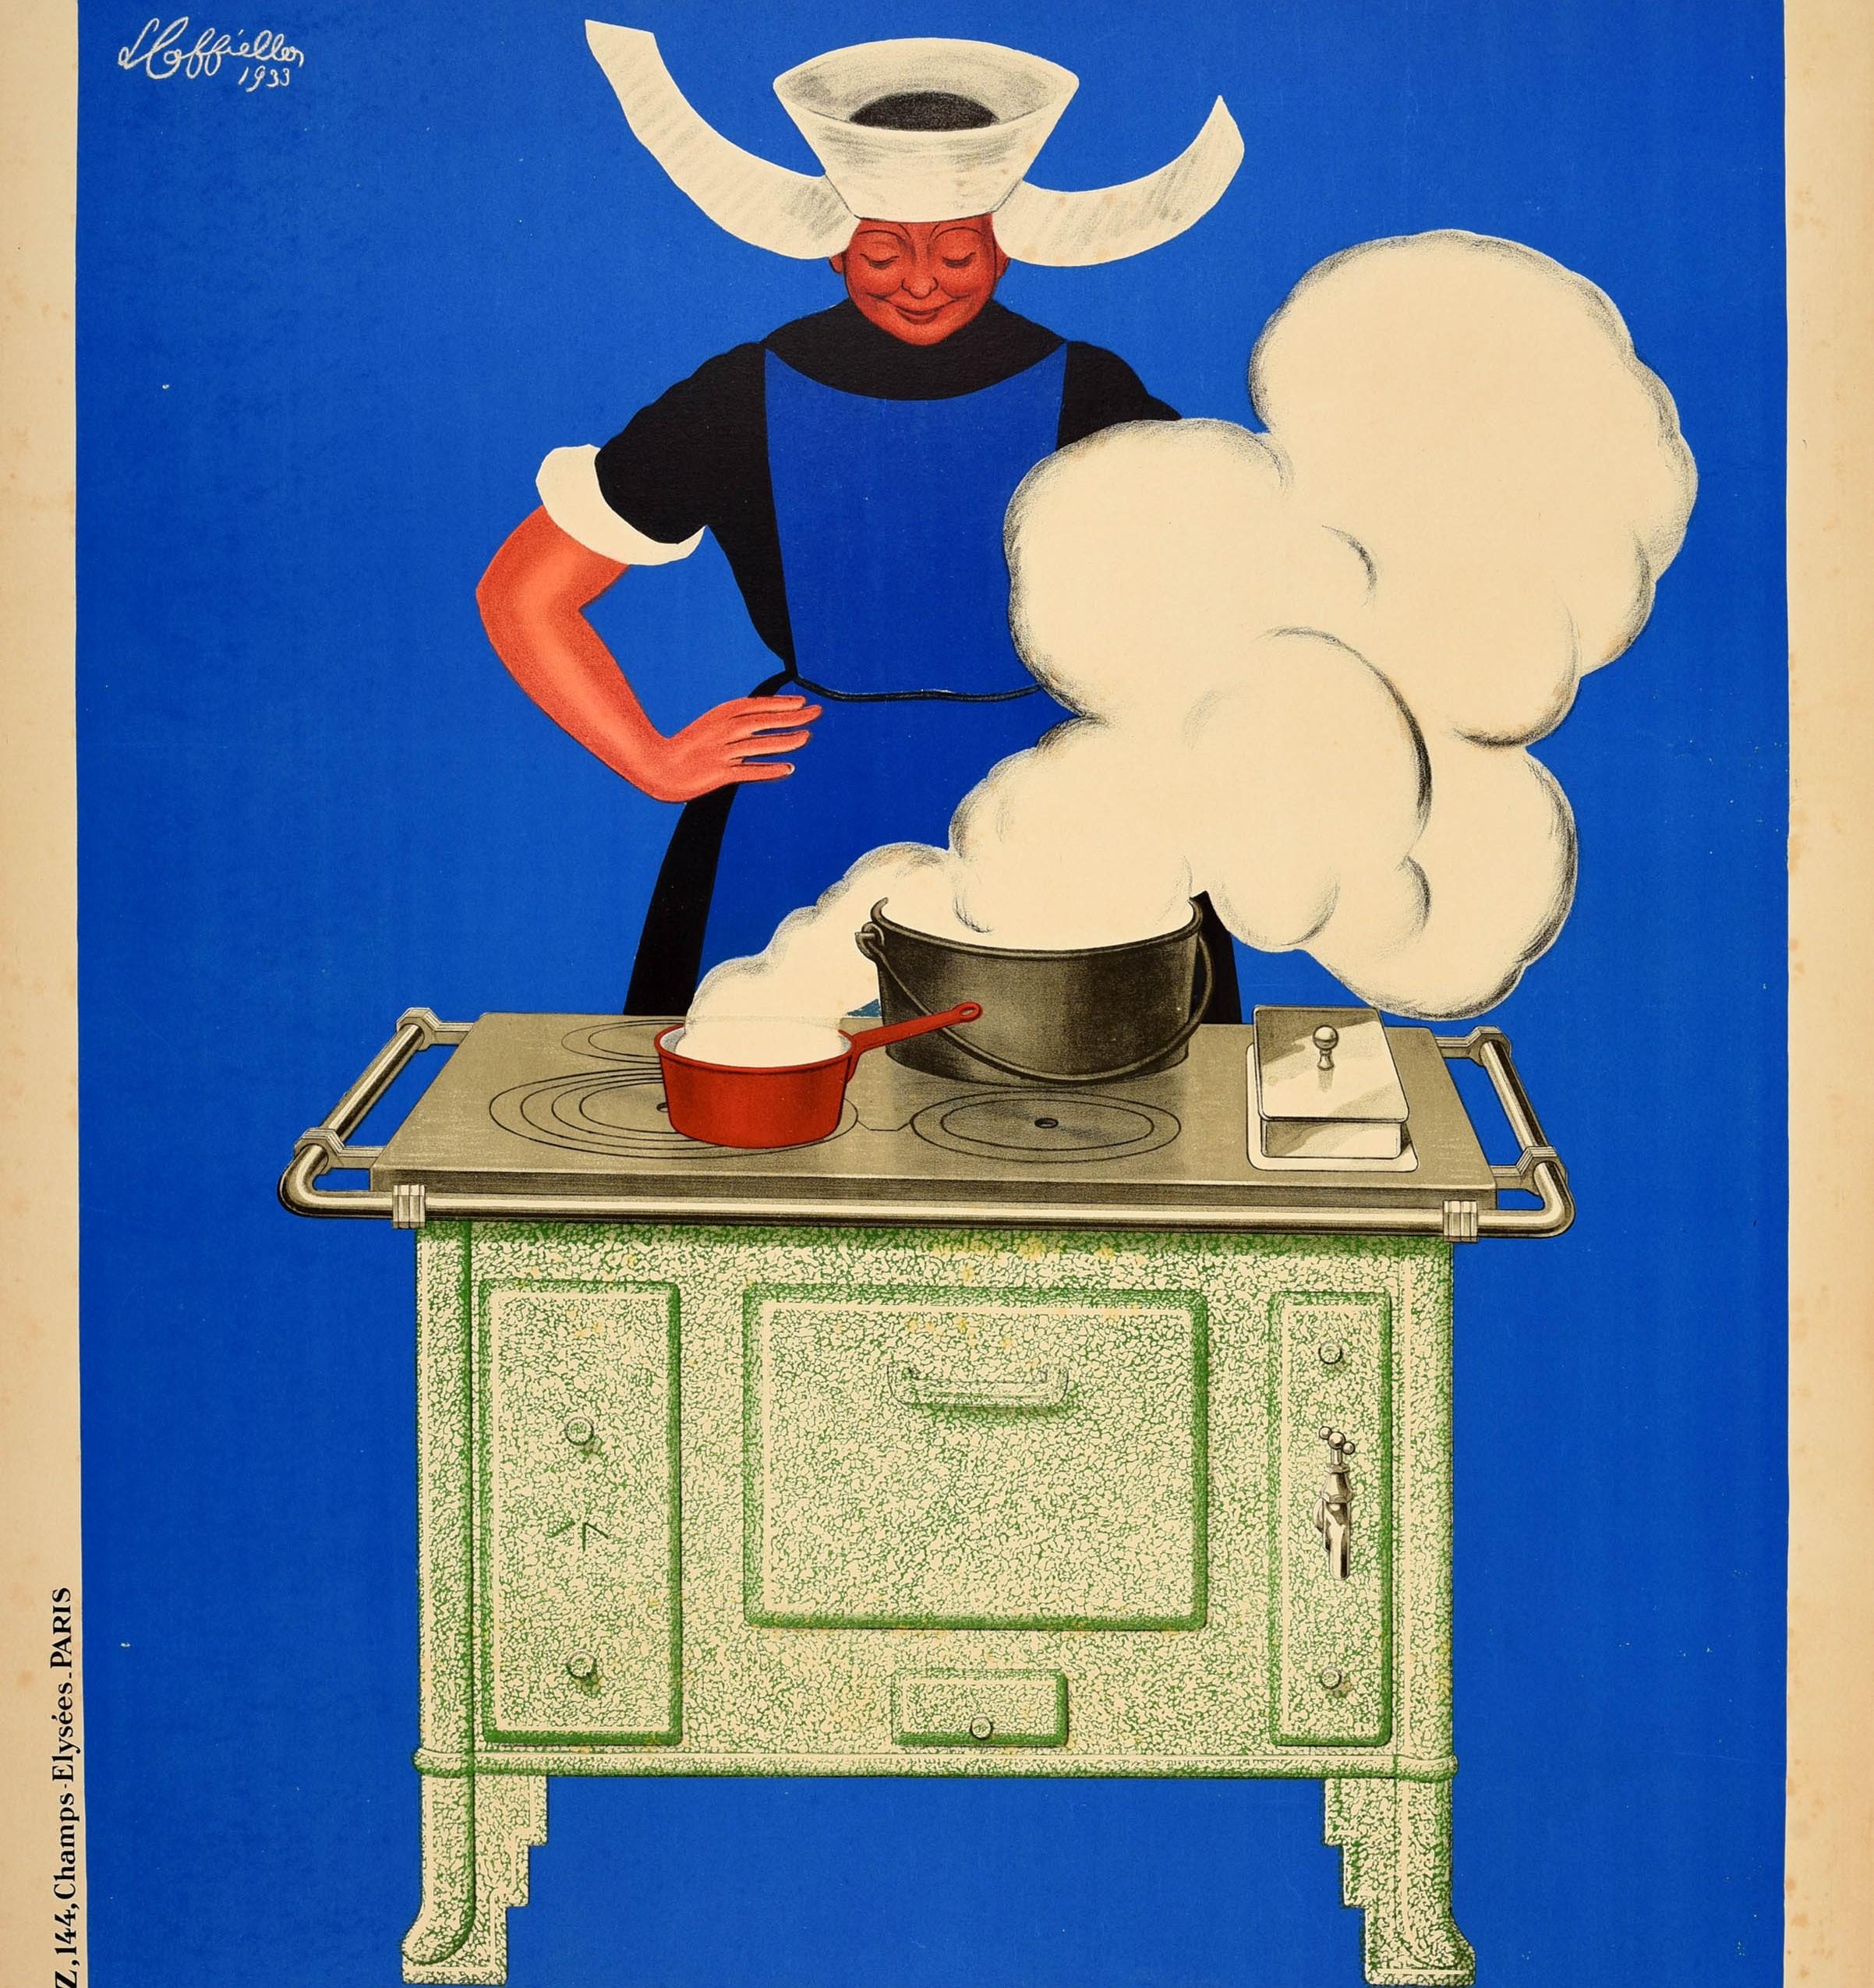 Original Vintage Advertising Poster Baudin Cuisiniere Cooking Leonetto Cappiello For Sale 3